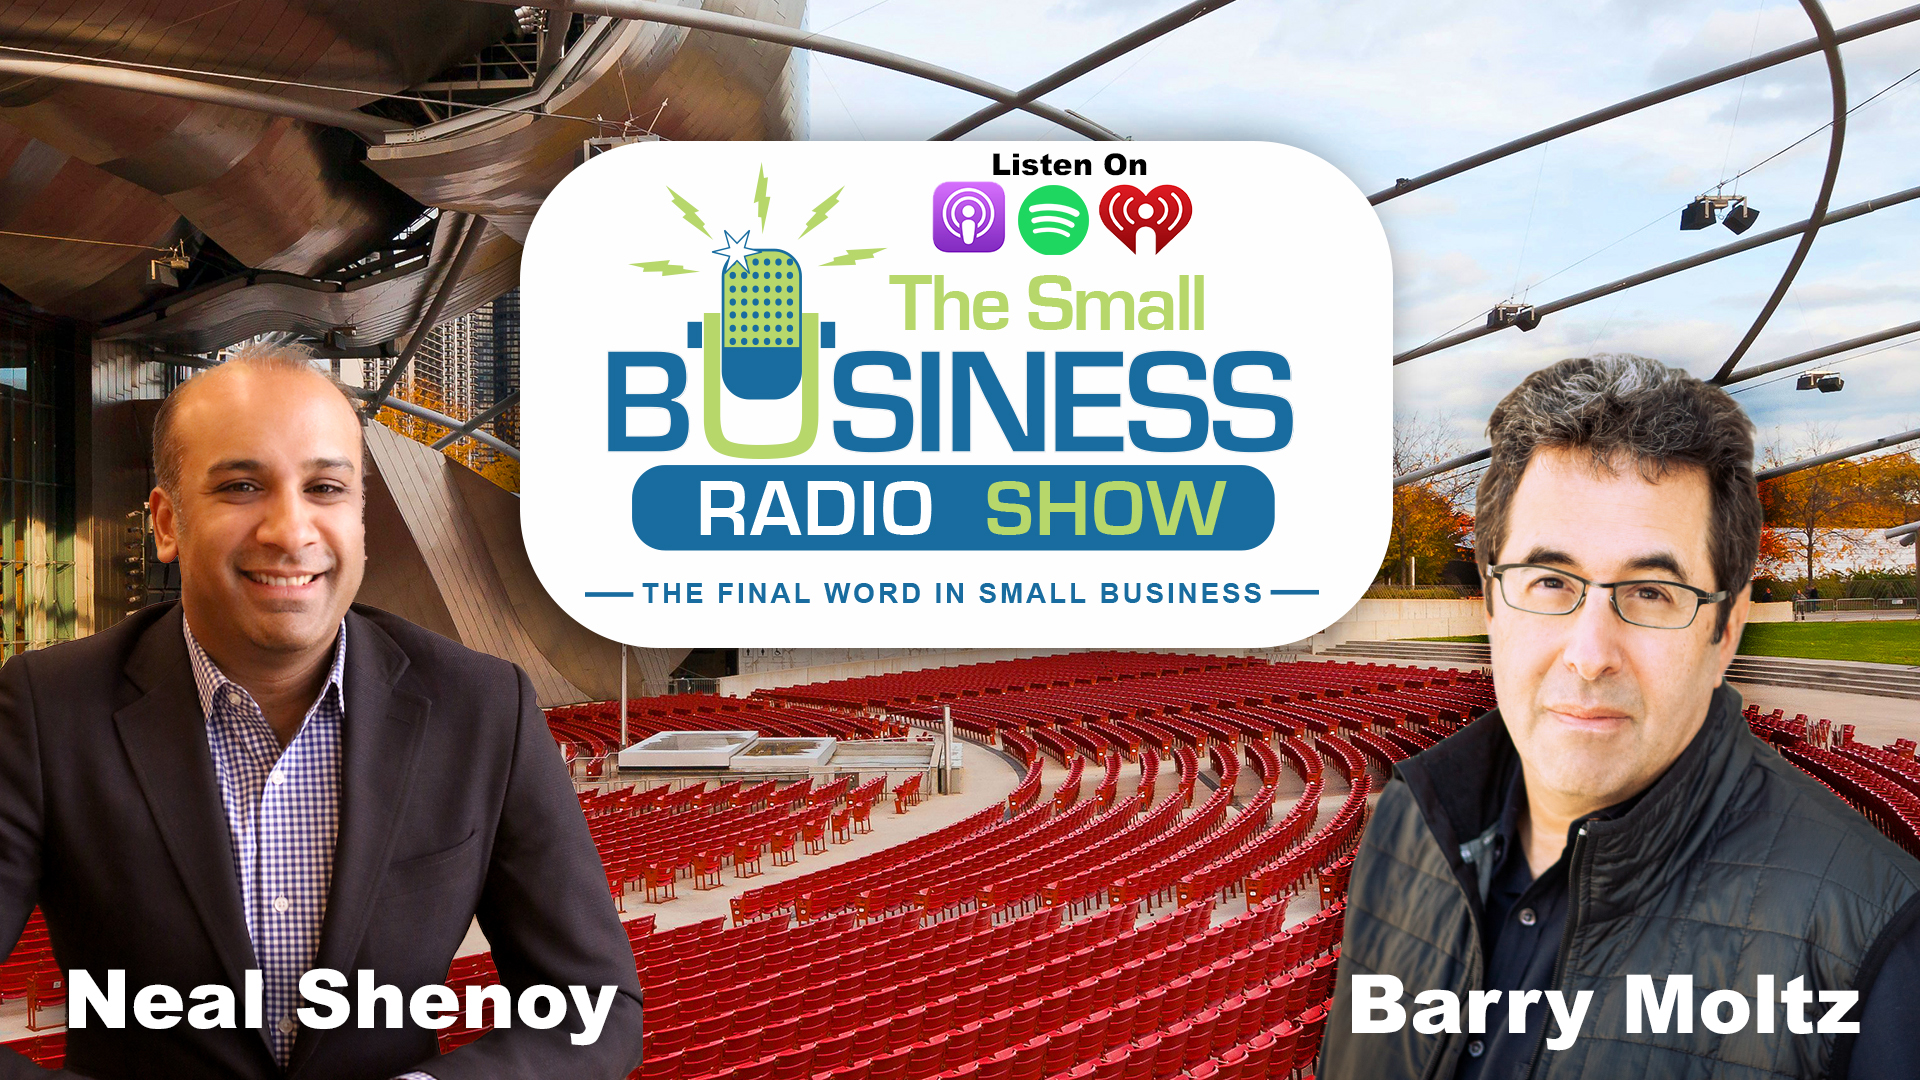 Neal Shenoy on The Small Business Radio Show